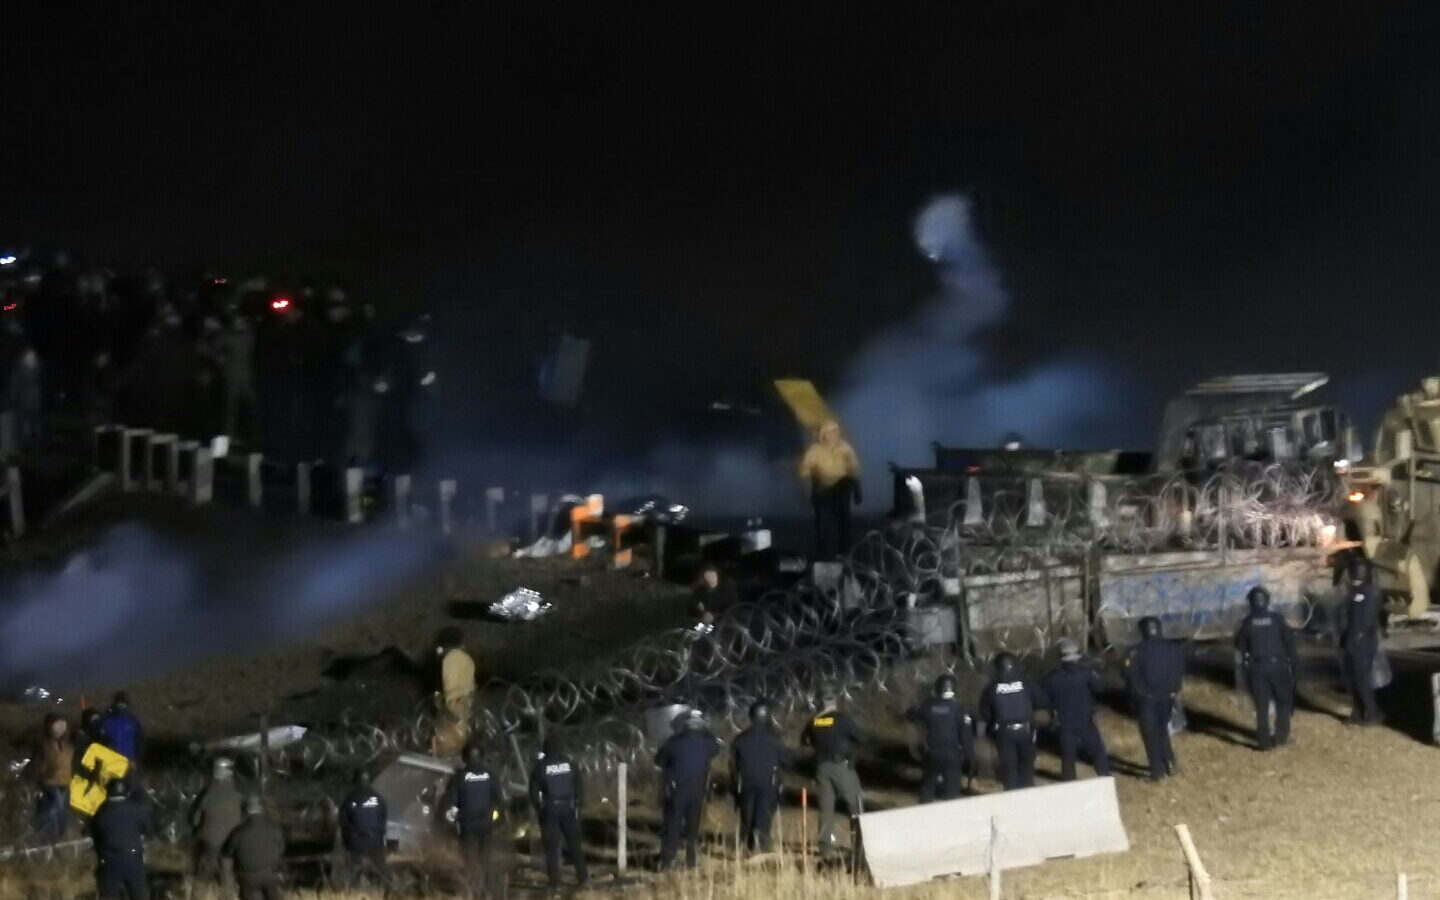 In this image provided by Morton County Sheriff’s Department, law enforcement and protesters clash near the site of the Dakota Access pipeline on Sunday, Nov. 20, 2016, in Cannon Ball, N.D. (Morton County Sheriff’s Department via AP)